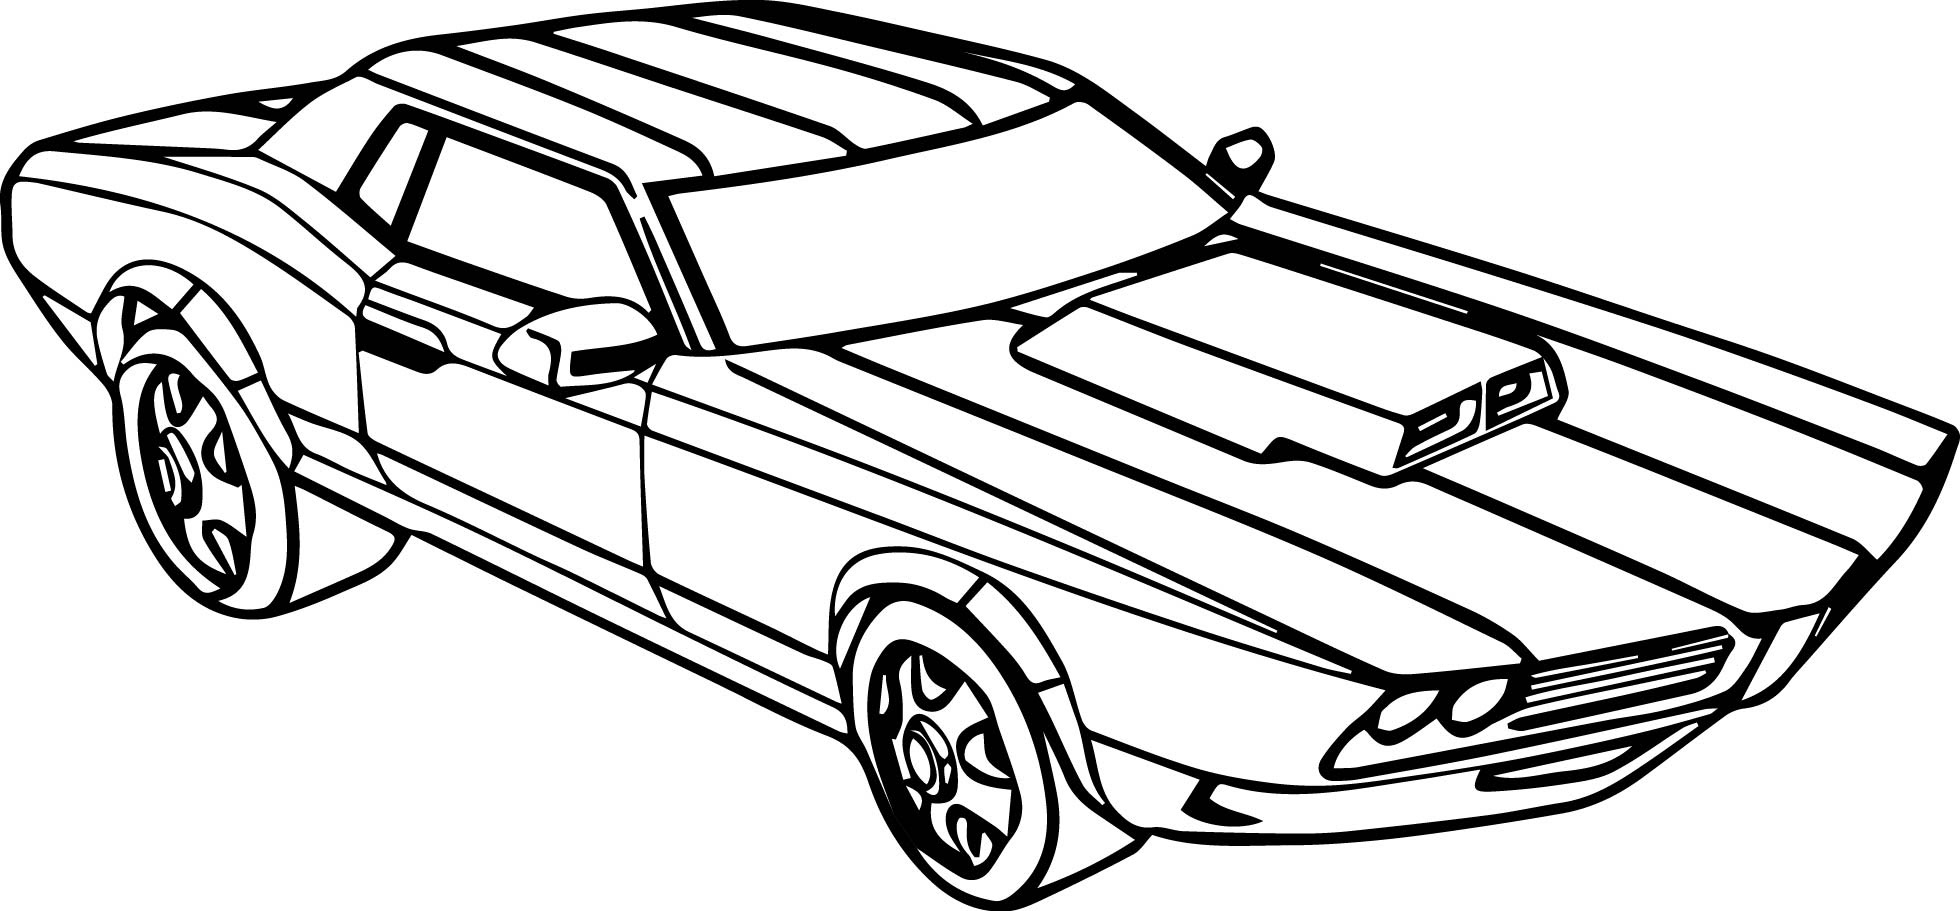 40 Top Race Car Coloring Pages Pdf Images & Pictures In HD